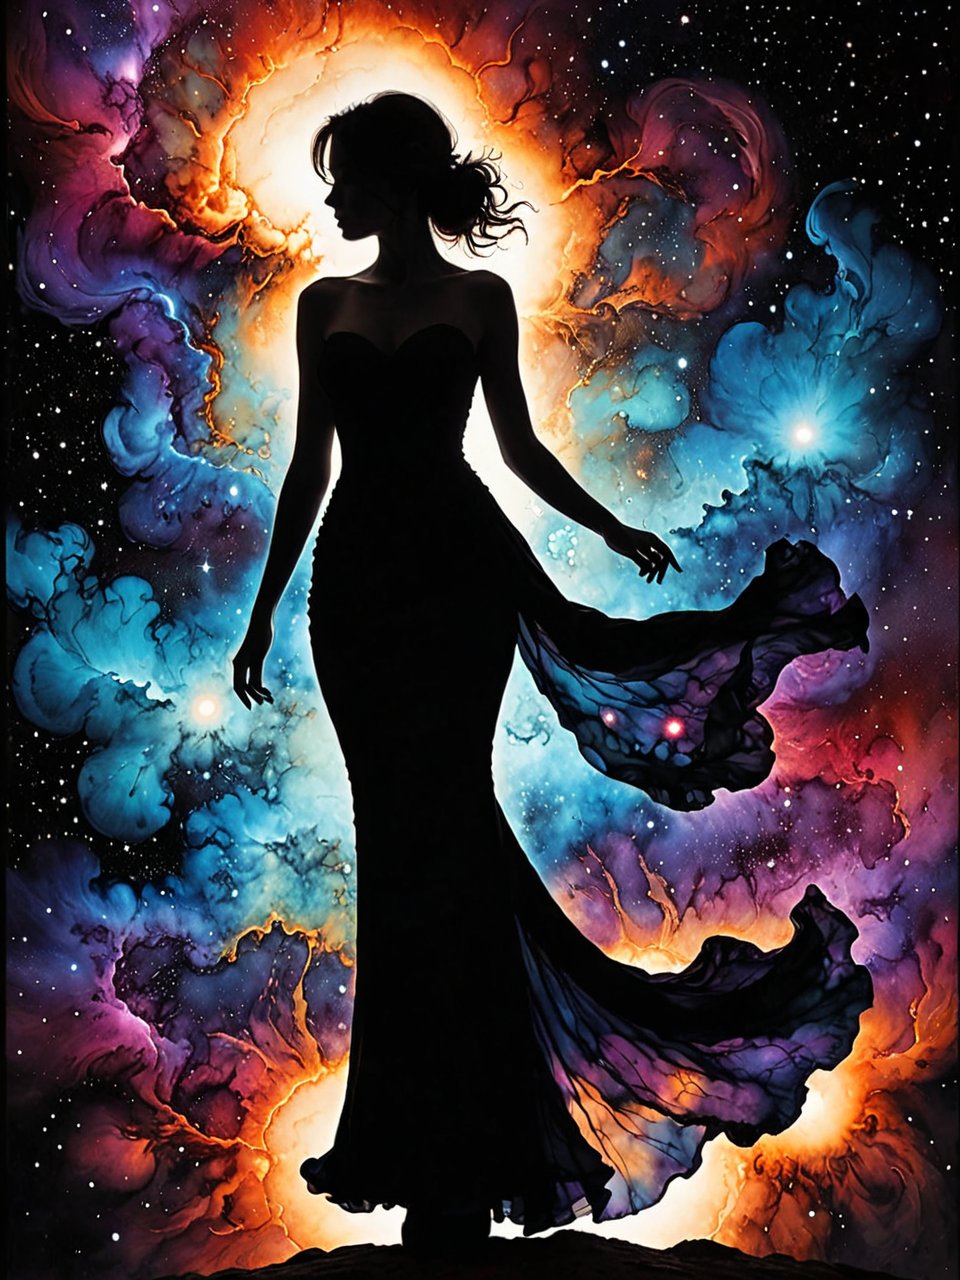 Silhouette Art, hyperrealistic art breathtaking a lineart (nebula alcohol ink sketch). [magnificent, shiny, intriguing weirdness, faetastic extravaganza, mystery of darkness, unusual natural aesthetics, glossy].
award-winning, professional, highly detailed . extremely high-resolution details, photographic, realism pushed to extreme, fine texture, incredibly lifelike, high contrast, well defined, Silhouette of girl wearing fitted evening dress, Silhouette Art.